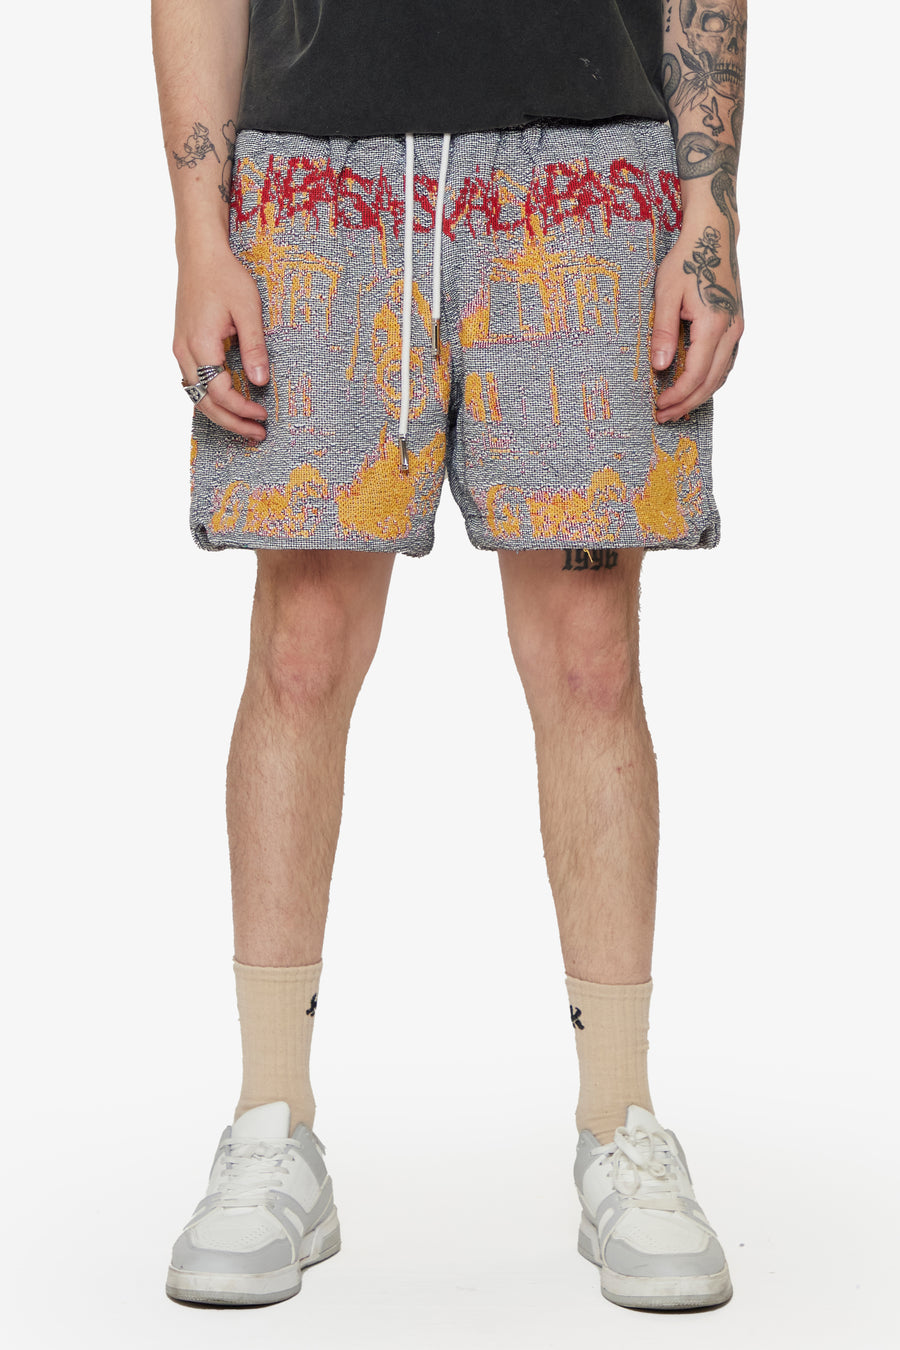 VALABASAS TAPESTRY SHORTS "GHOST HAND" WHITE